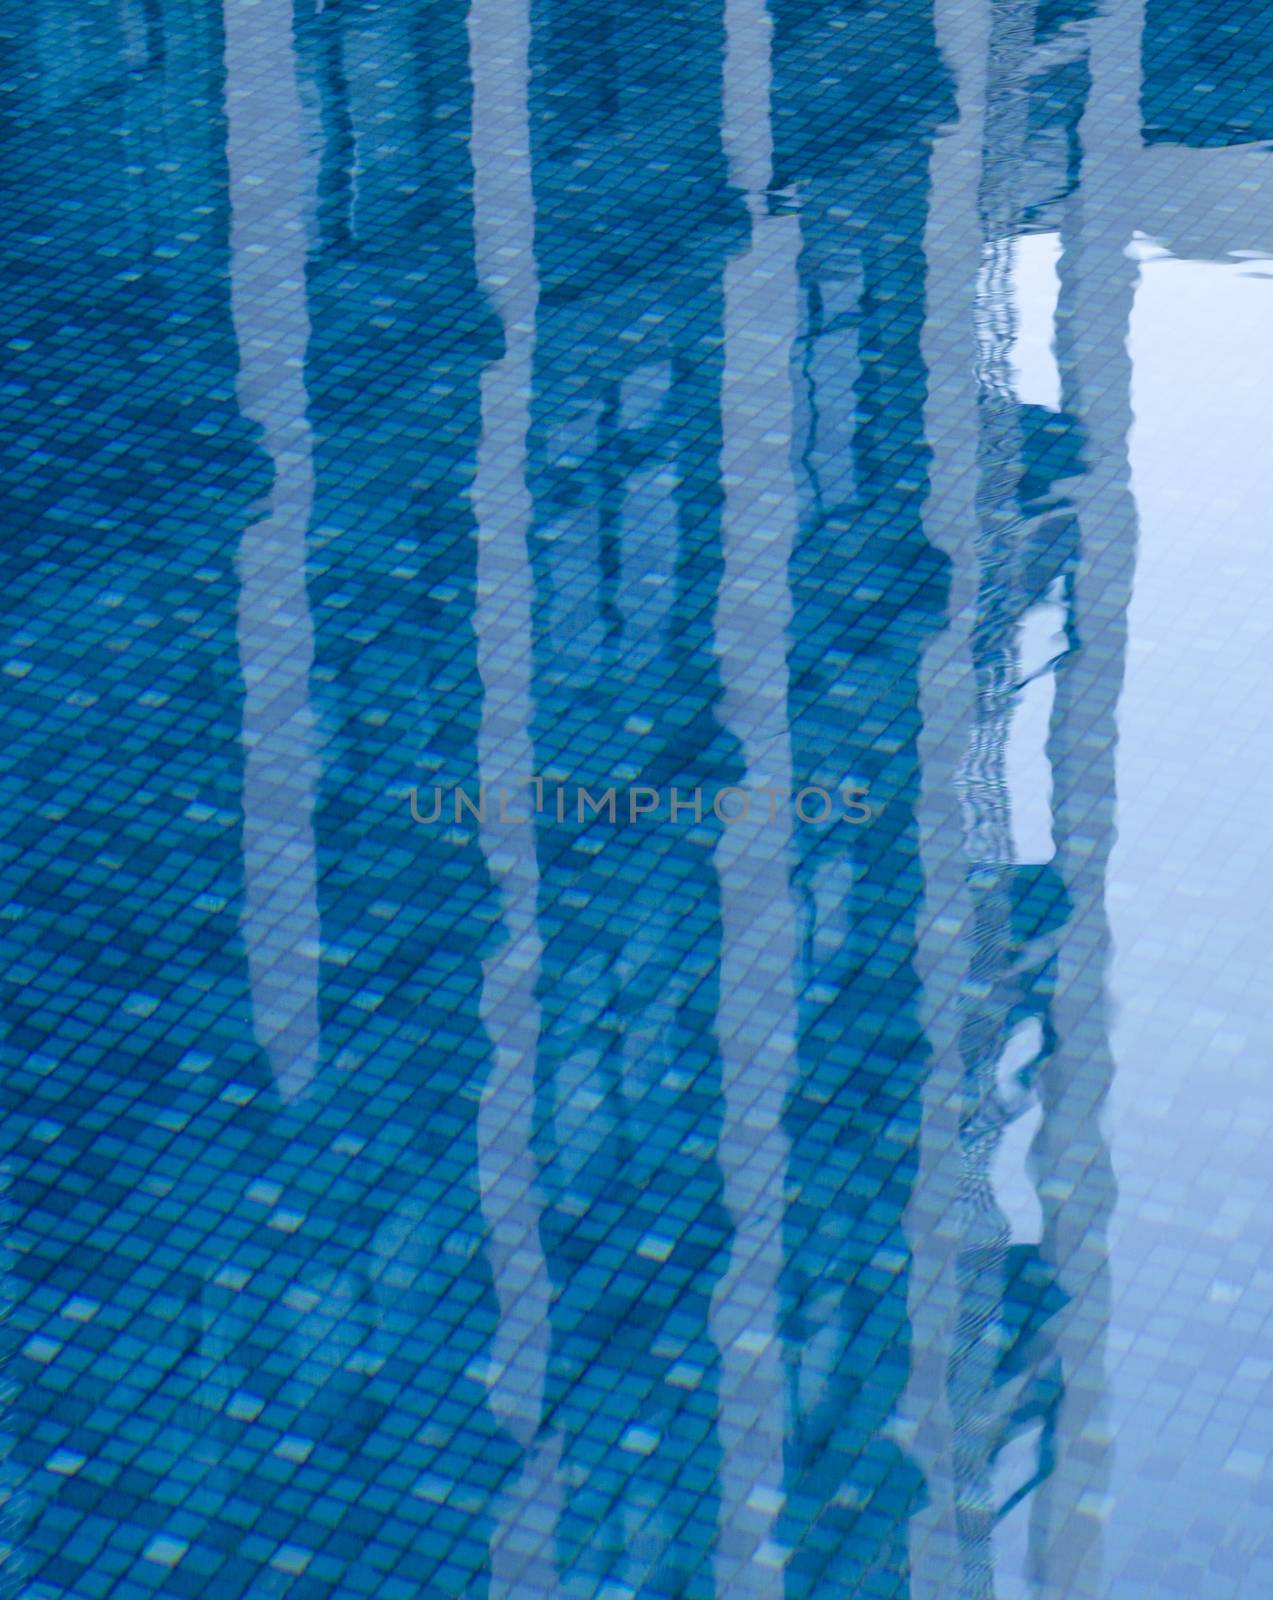 Reflections of building in the calm swimming pool  by phochi